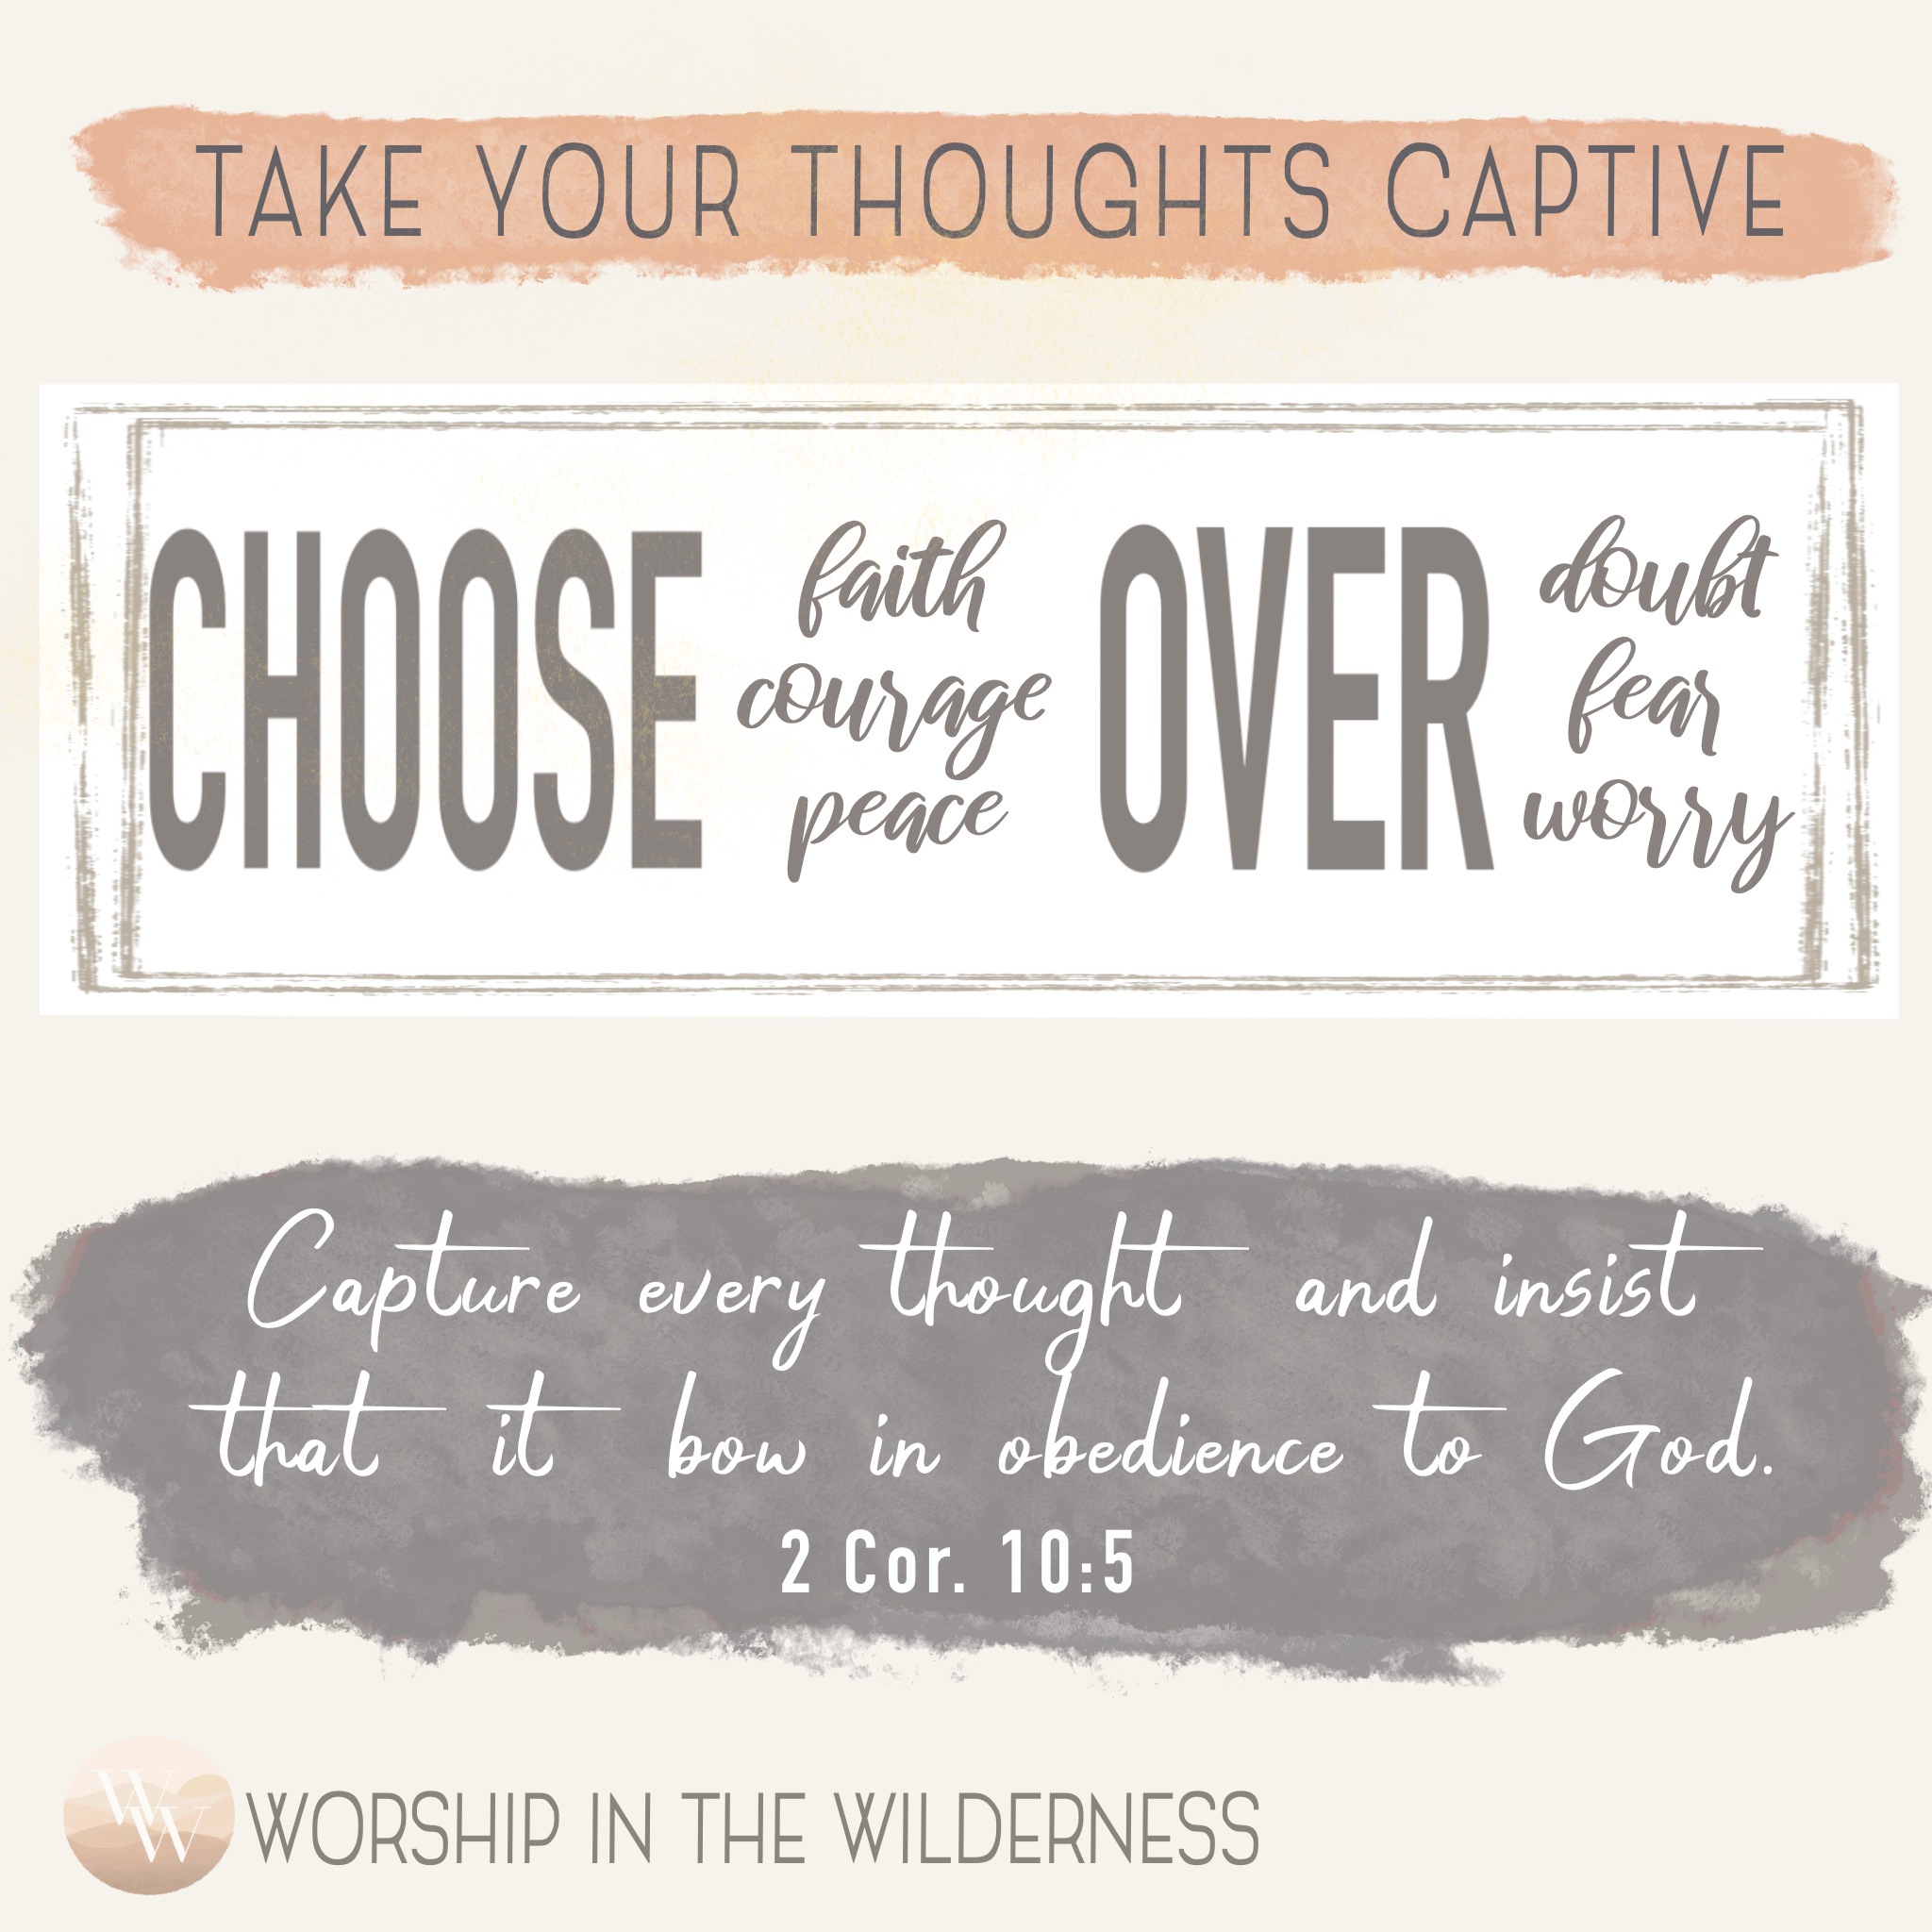 TAKE YOUR THOUGHTS CAPTIVE